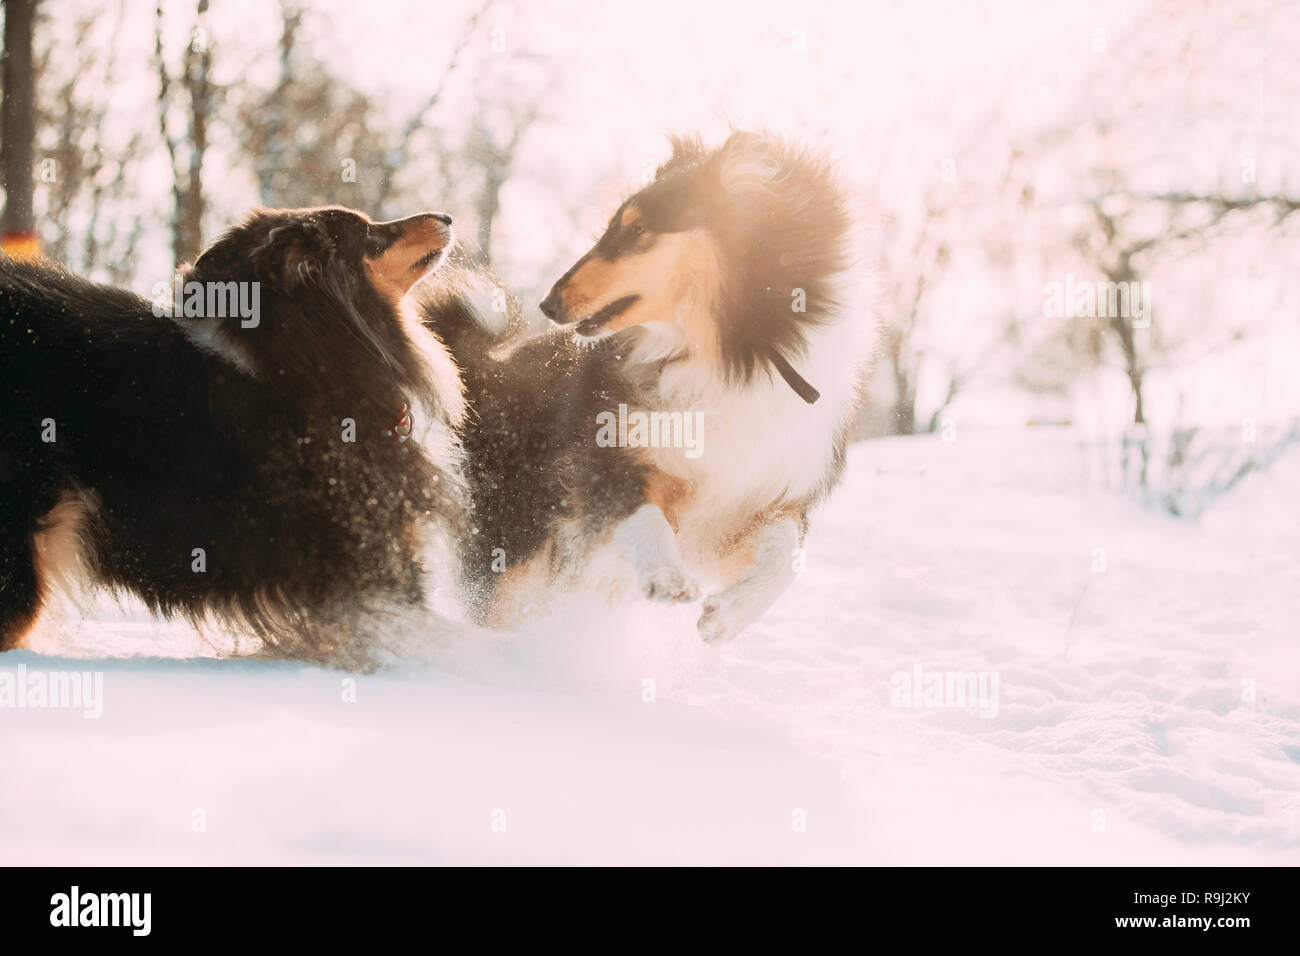 Two Funny Tricolor Rough Collie, Scottish Collie, English Collie, Lassie Dogs Running Together Outdoor In Snowy Park At Winter Day. Active Dogs Play I Stock Photo